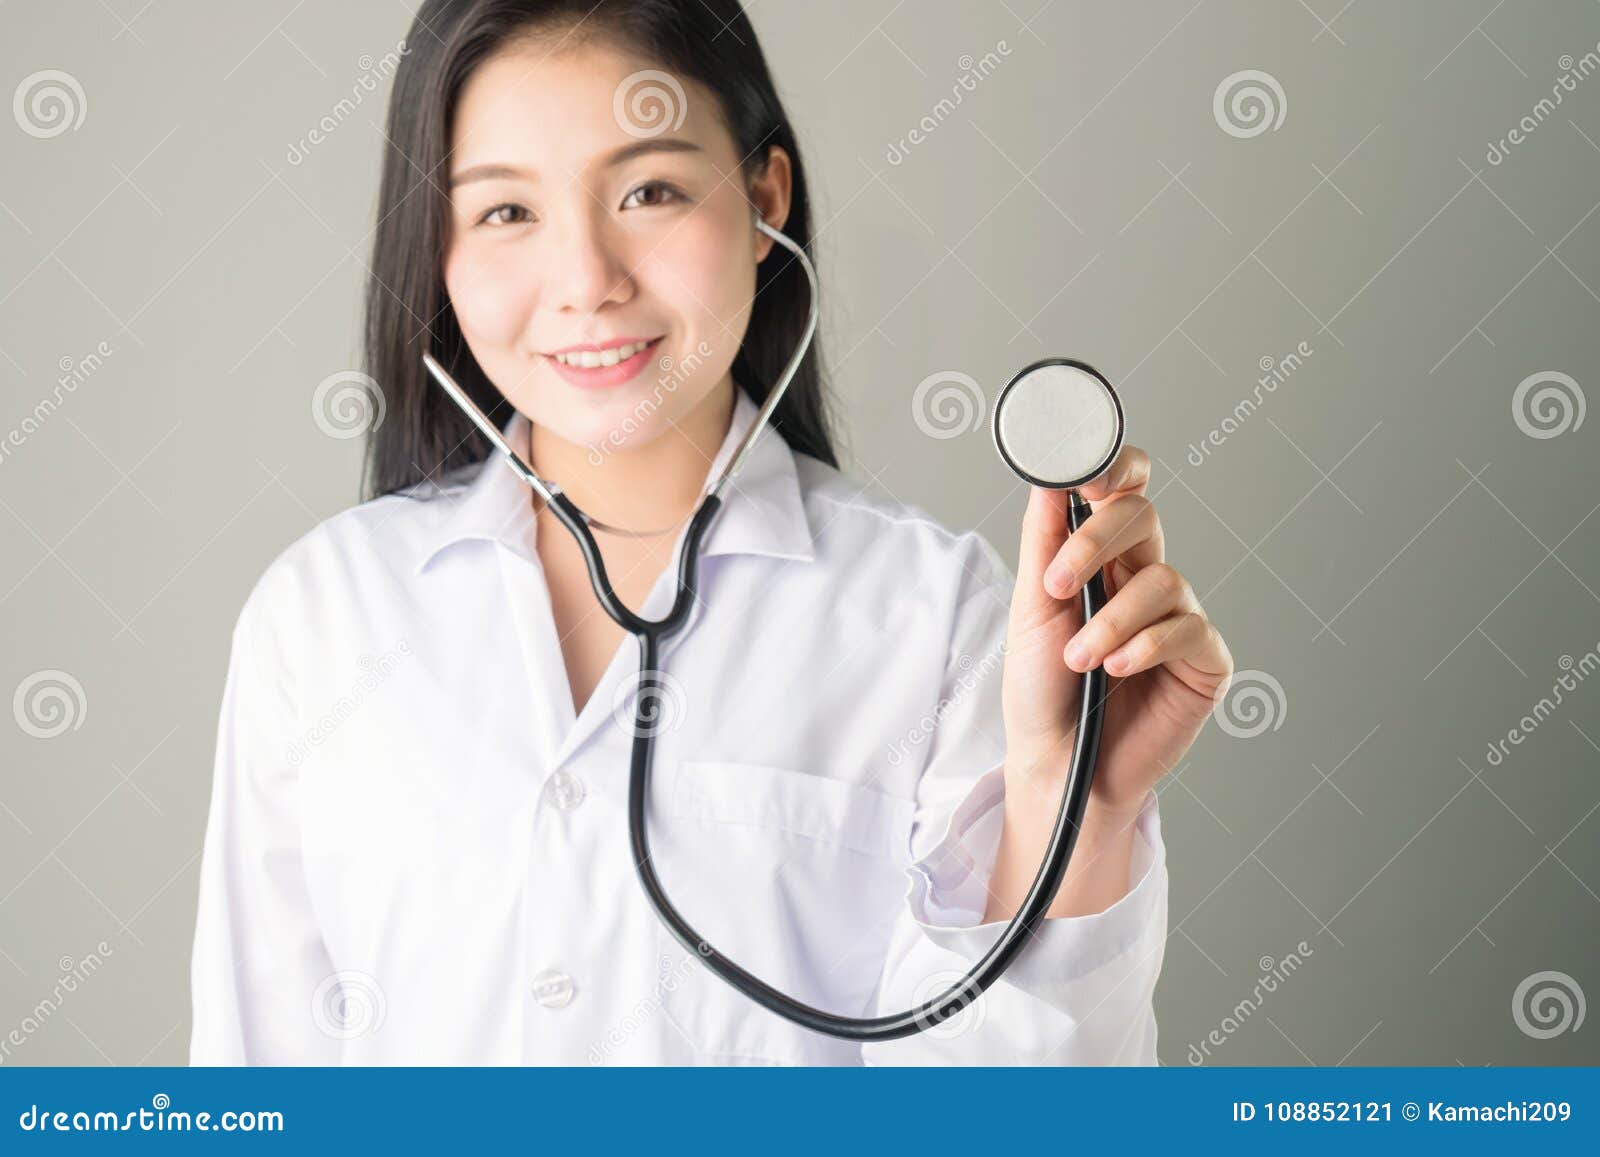 The Doctor Uses the Stethoscope To Catch Up and Lift Up. Stock